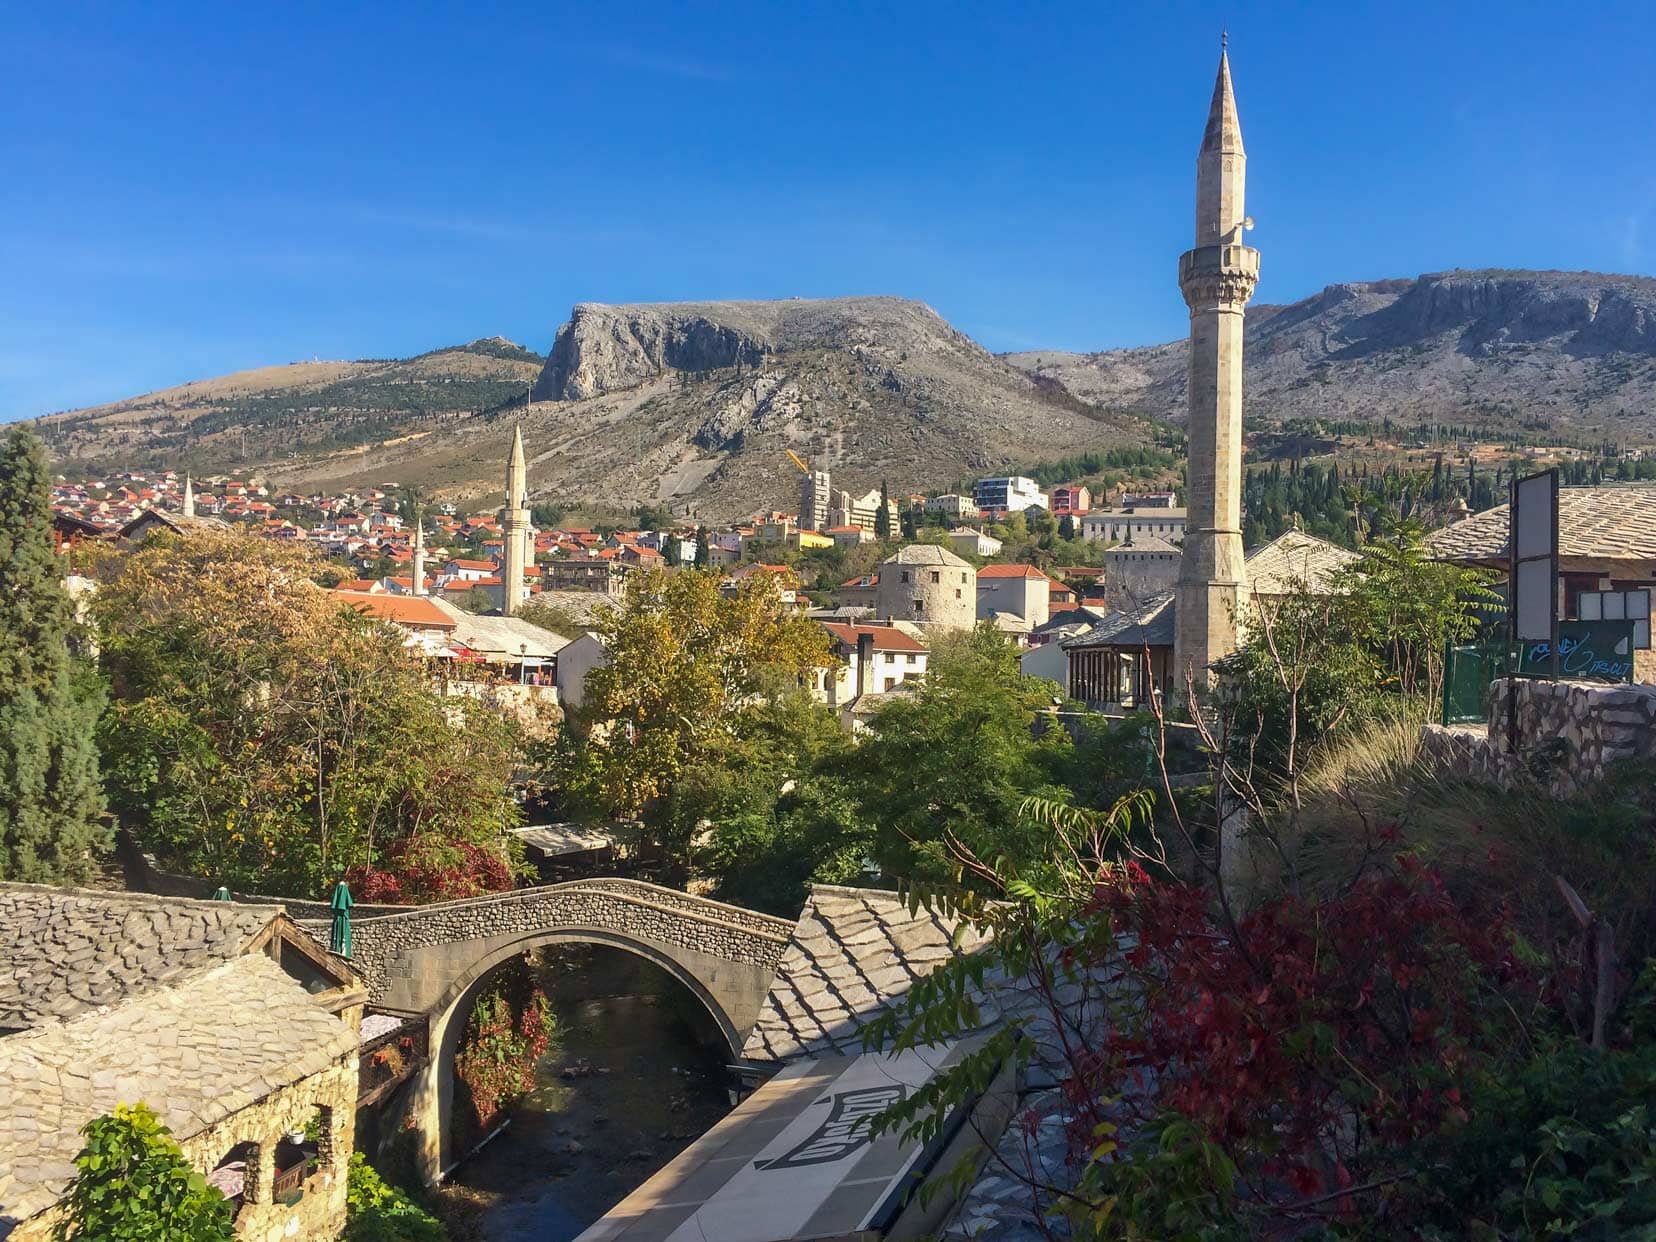 Mostar in Bosnia, a stone bridge in the foreground and minarets in the back ground with a bak drop of craggy mountains